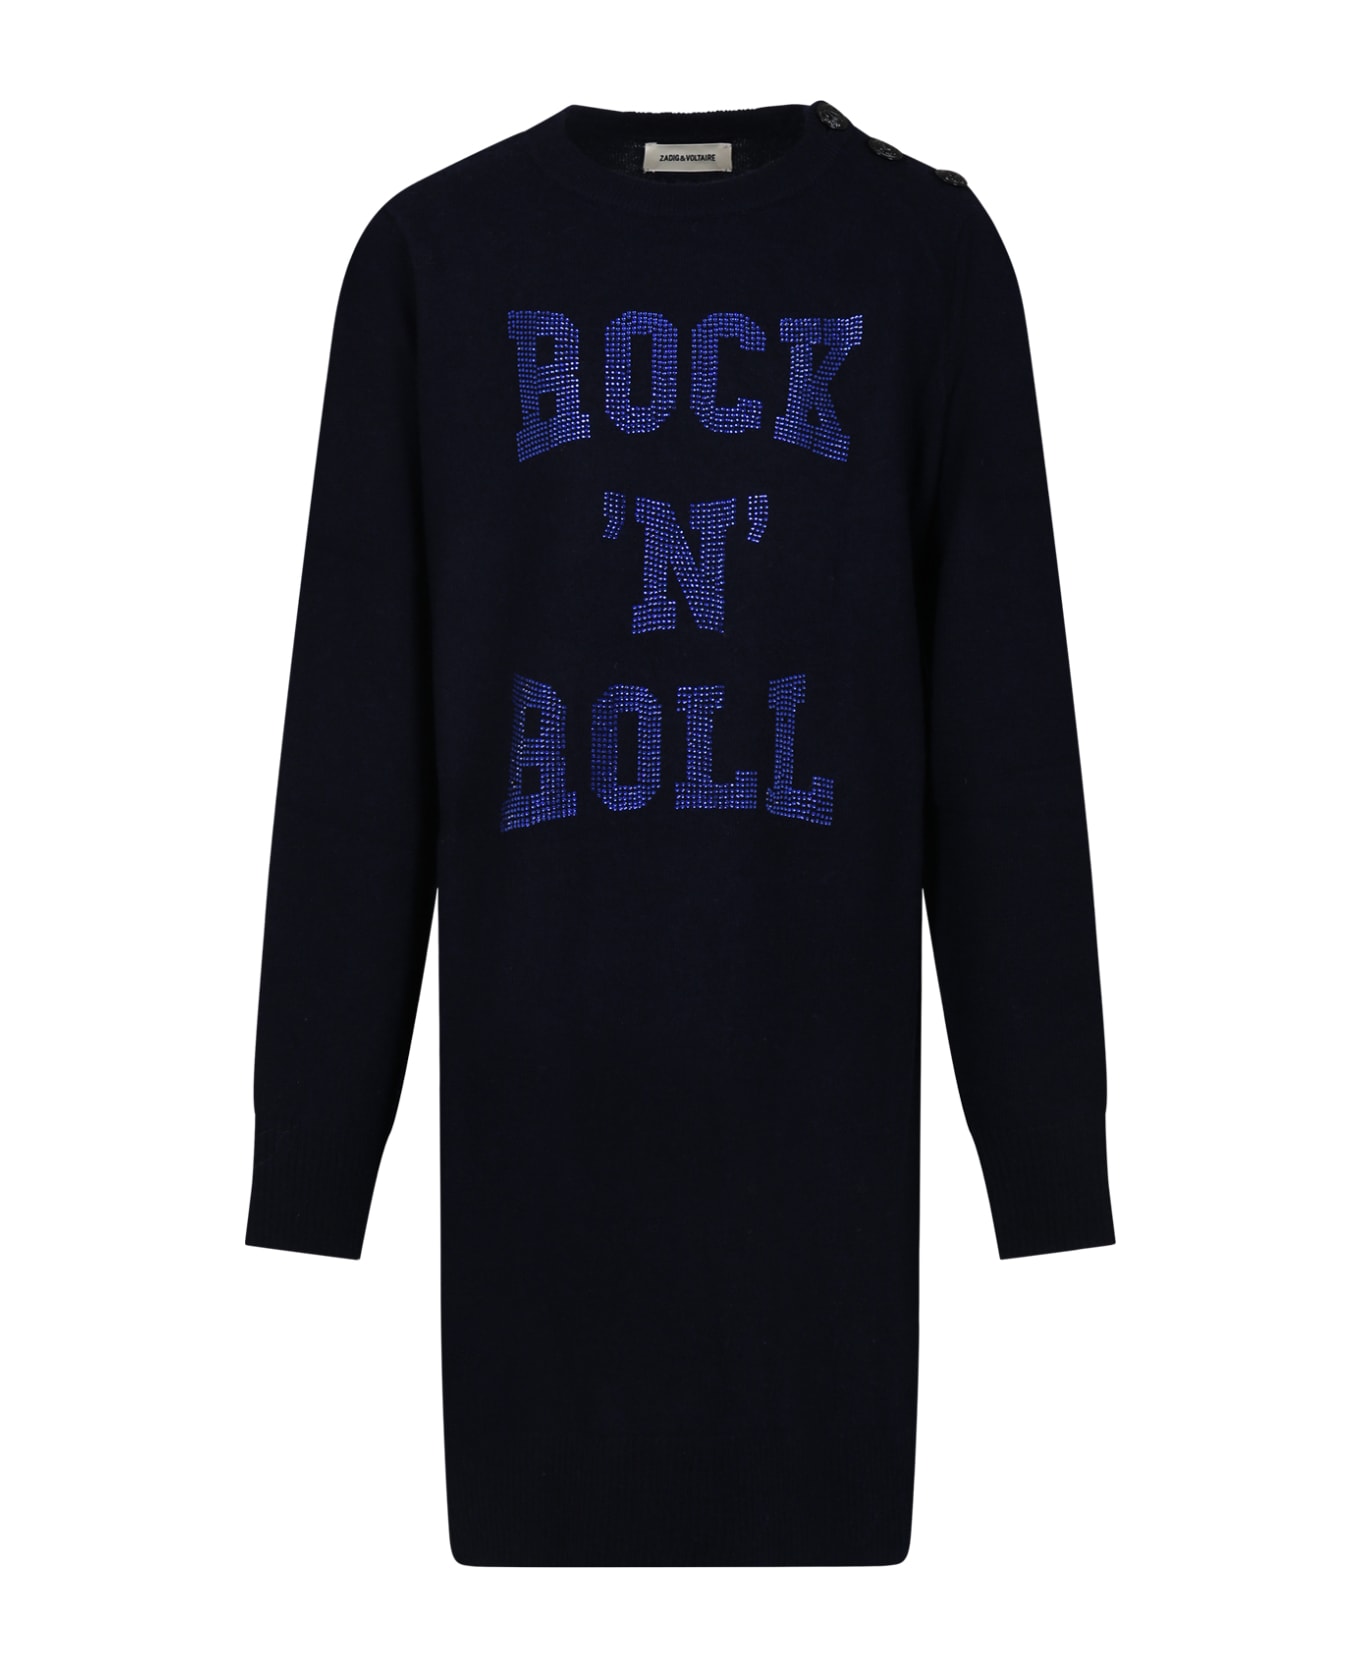 Zadig & Voltaire Blue Dress Fro Girl With Writing - Blue